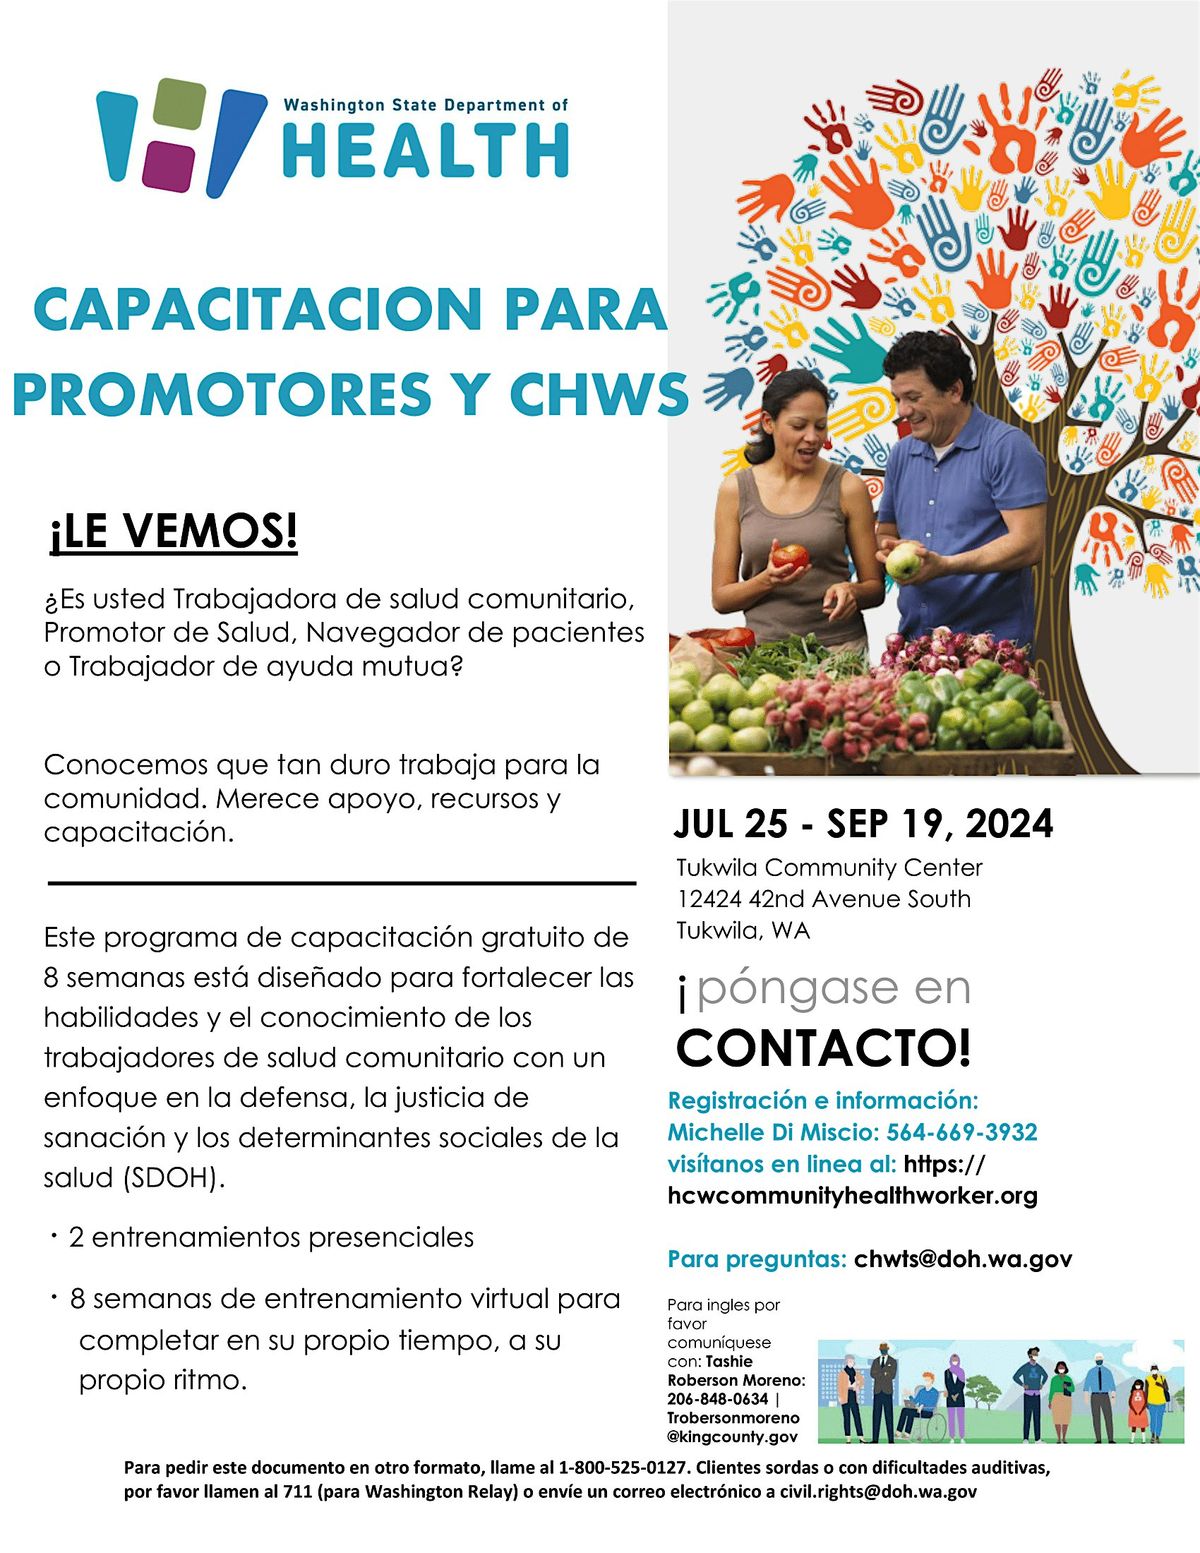 DOH-CHW Competency Training in Spanish